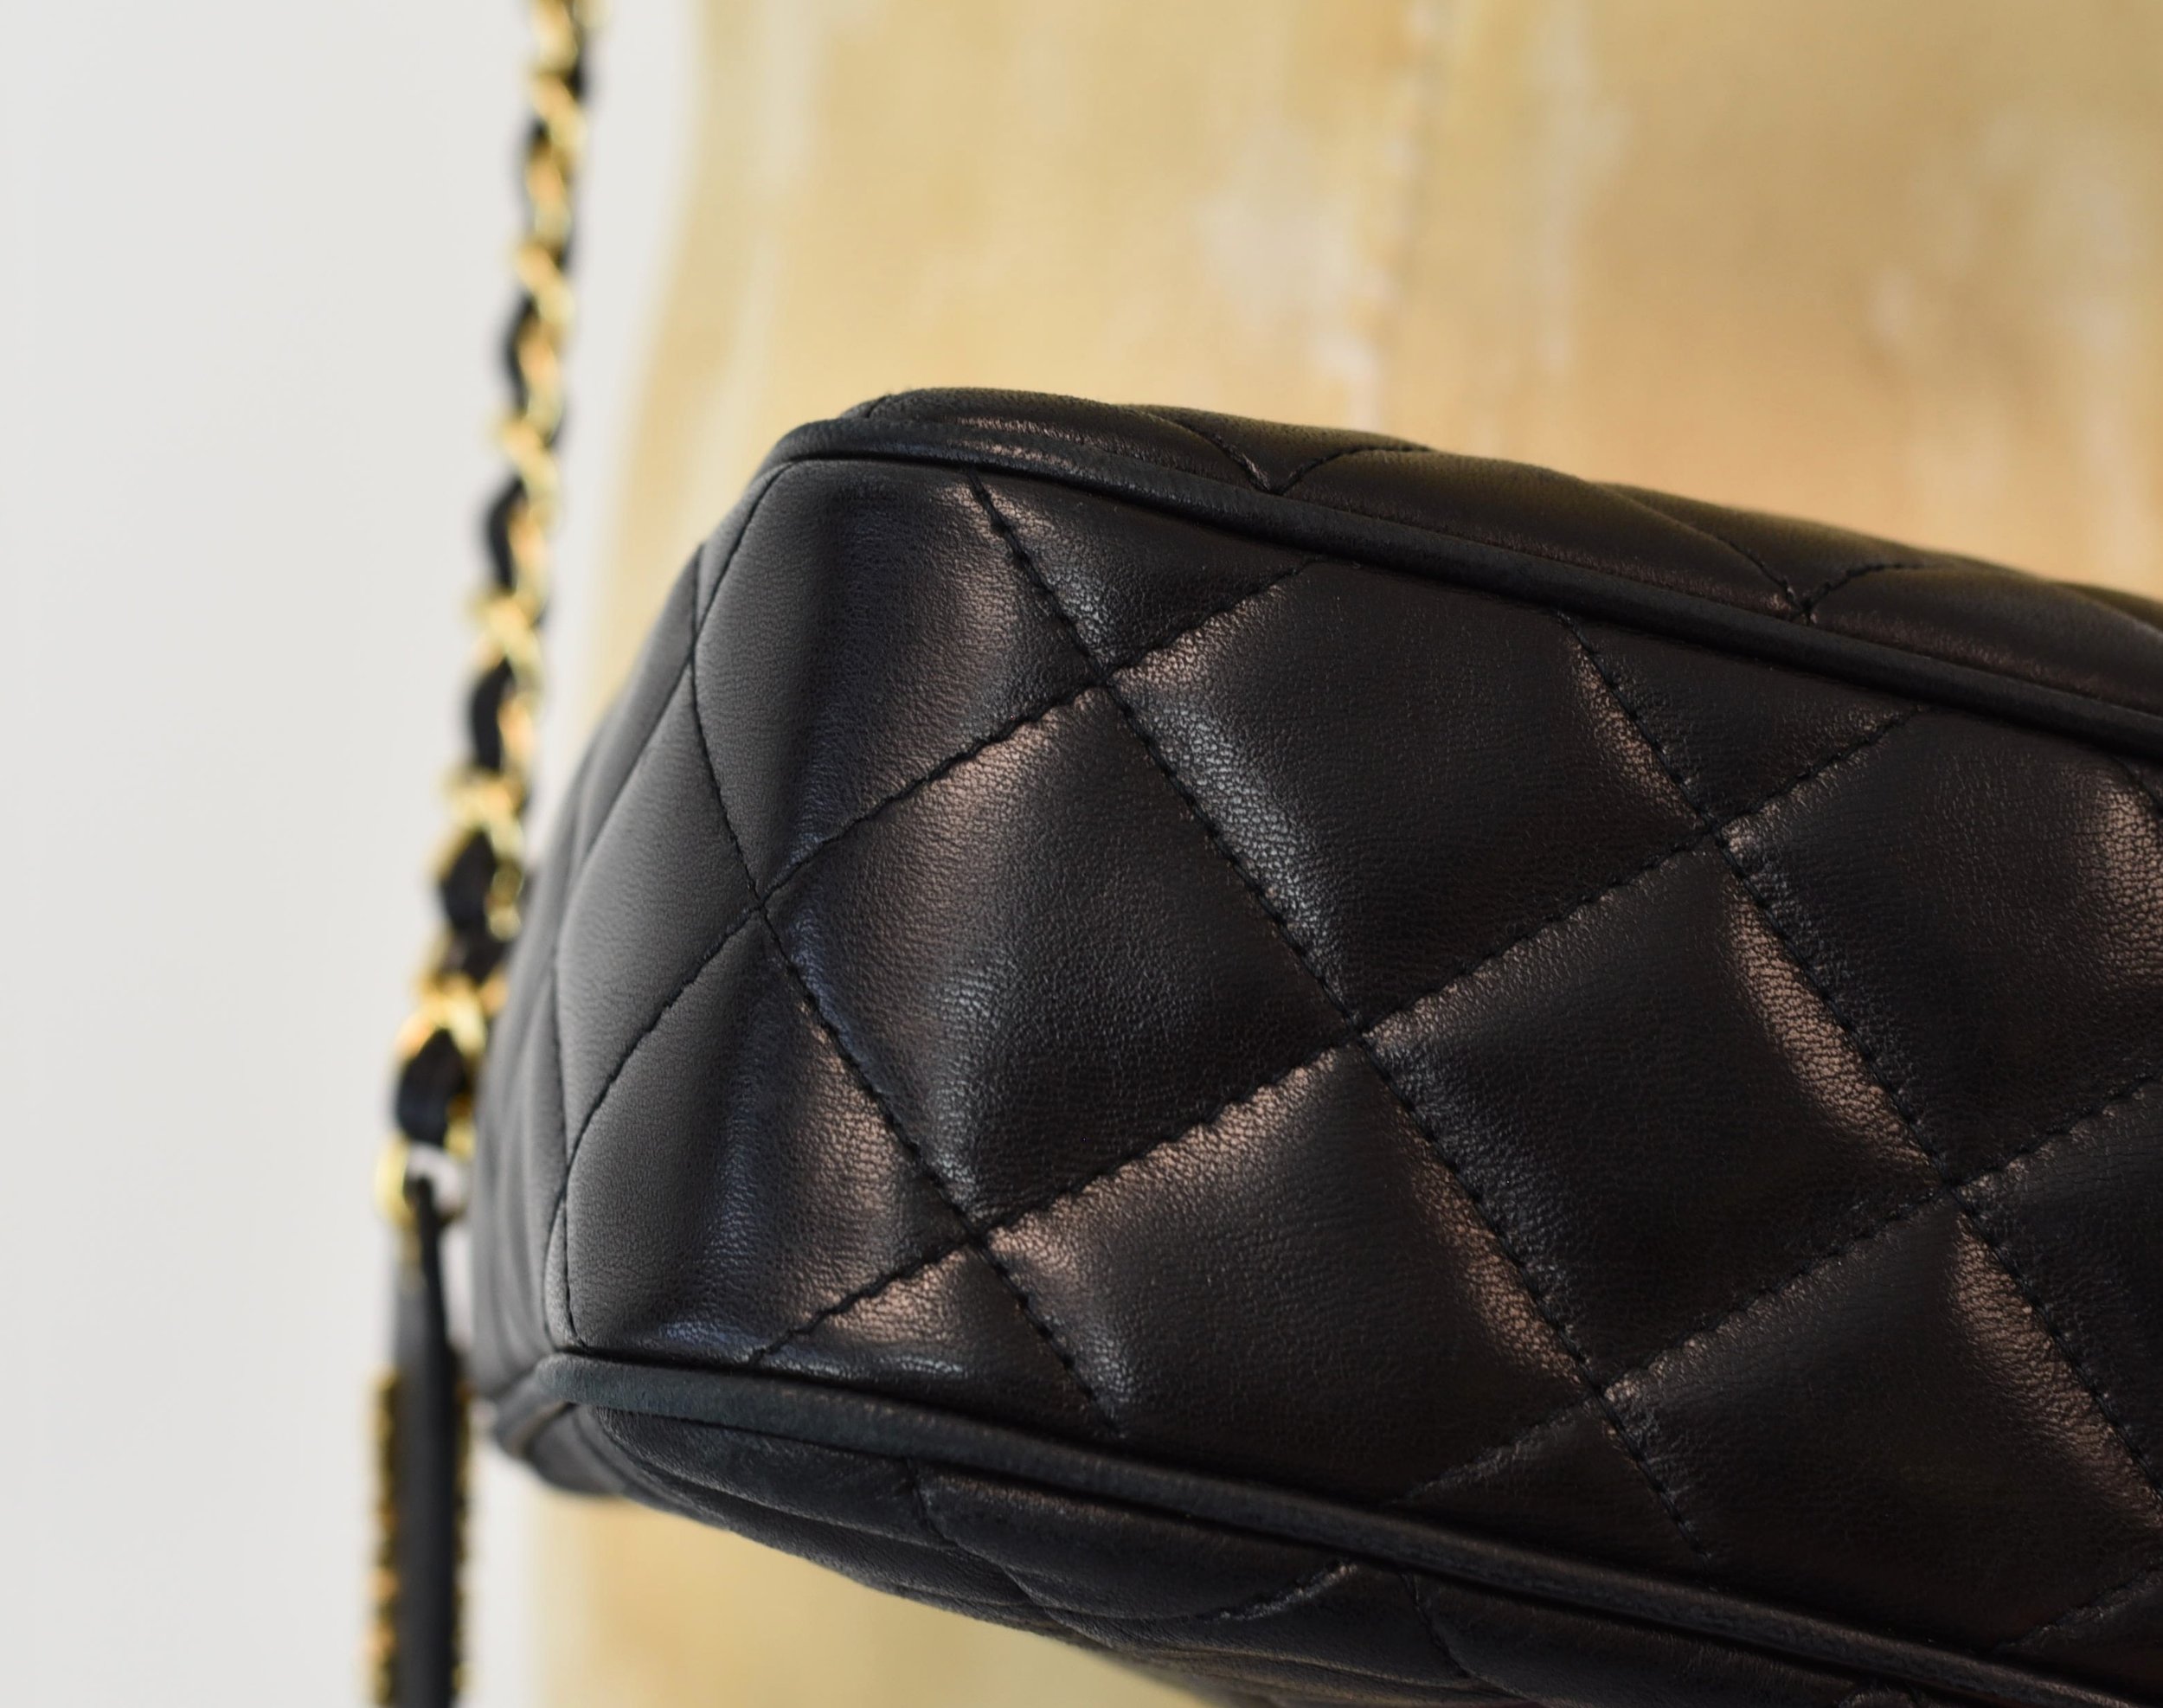 1990s Chanel Black Quilted Lambskin Leather with Gold Tone Hardware Camera Bag  Purse — Canned Ham Vintage